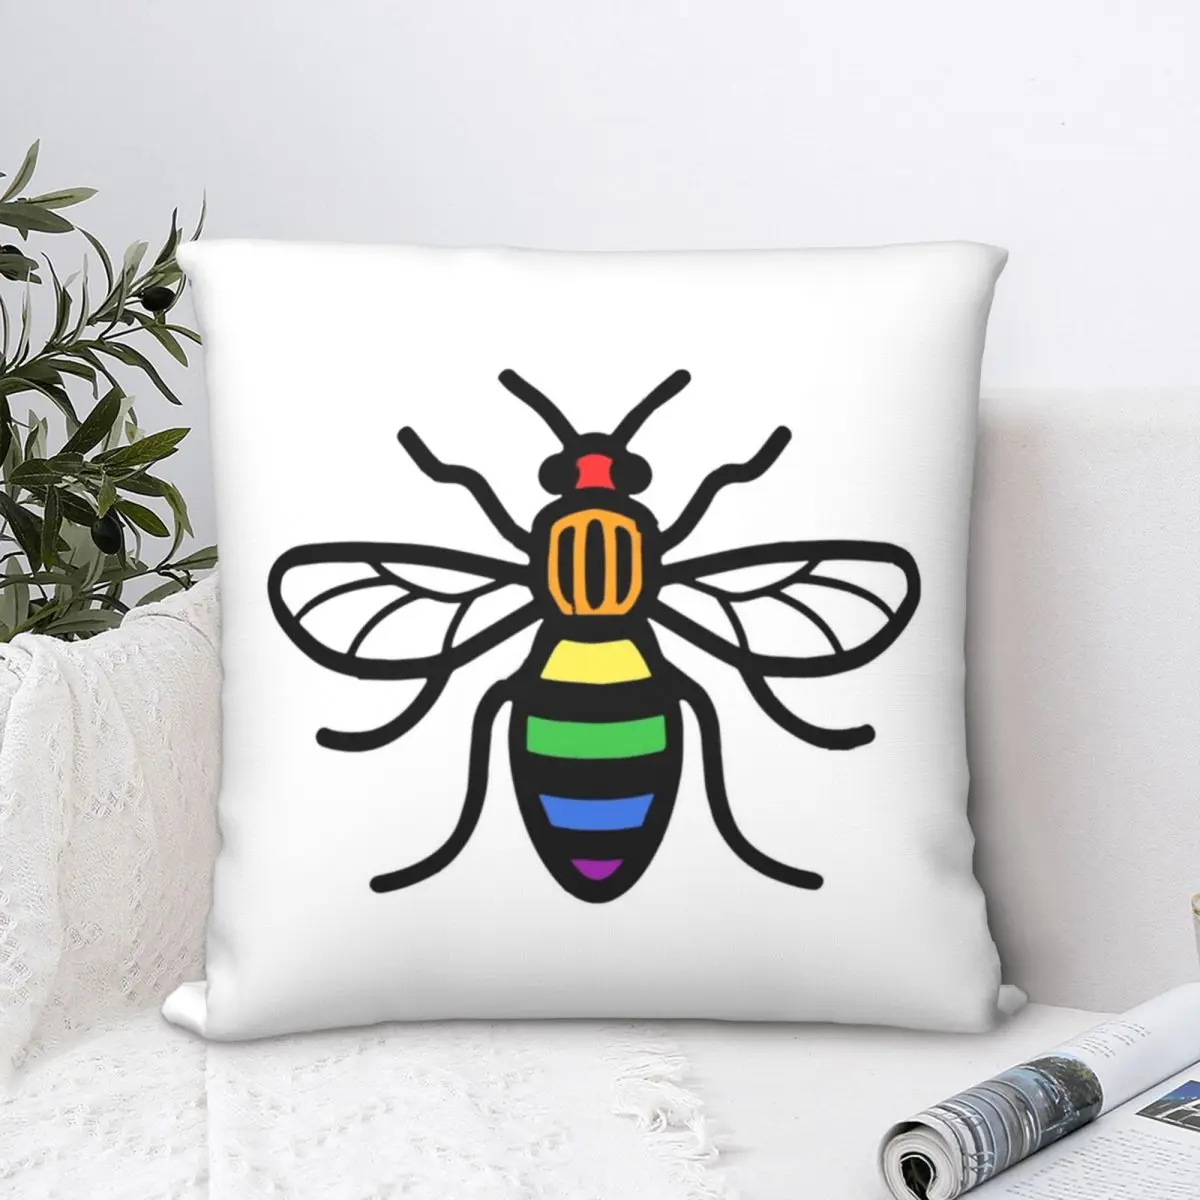 

RAINBOW WORKER BEE Square Pillowcase Cushion Cover cute Home Decorative Polyester Pillow Case Room Simple 45*45cm